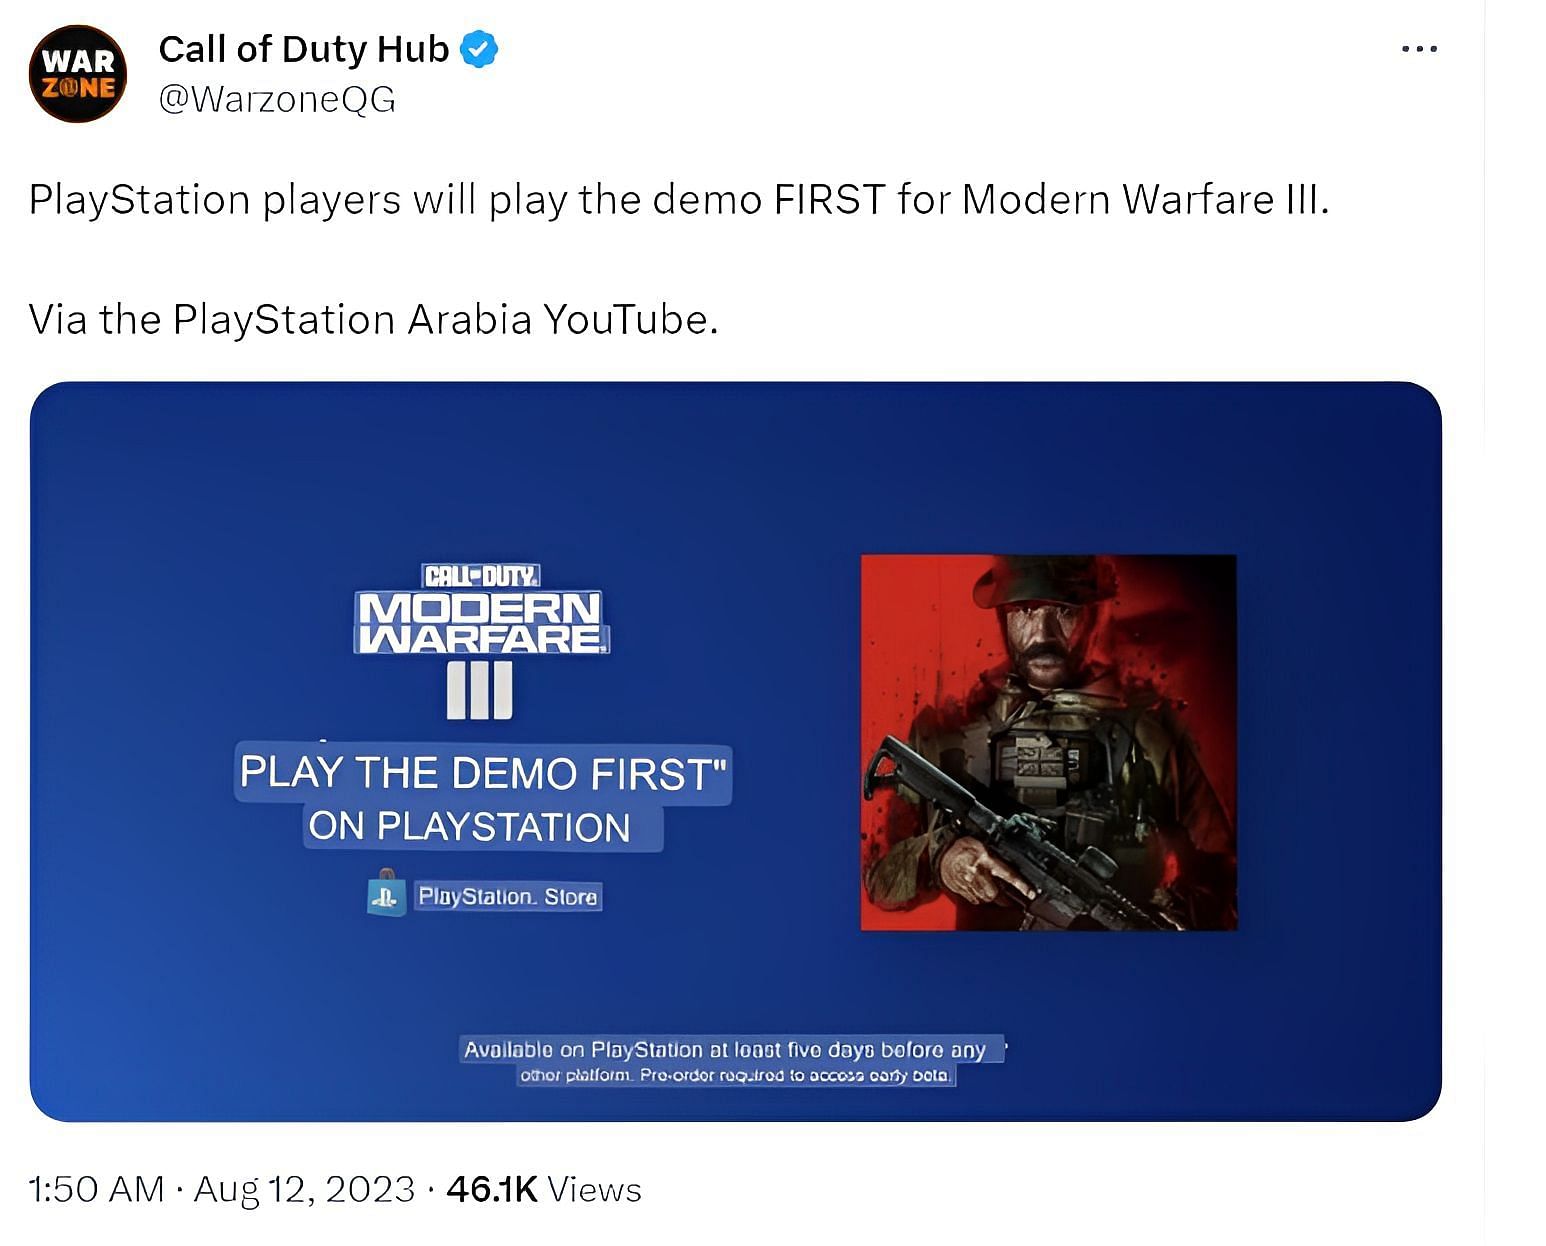 MW3 beta to release early on PlayStation (Image via Twitter/Call of Duty Hub)